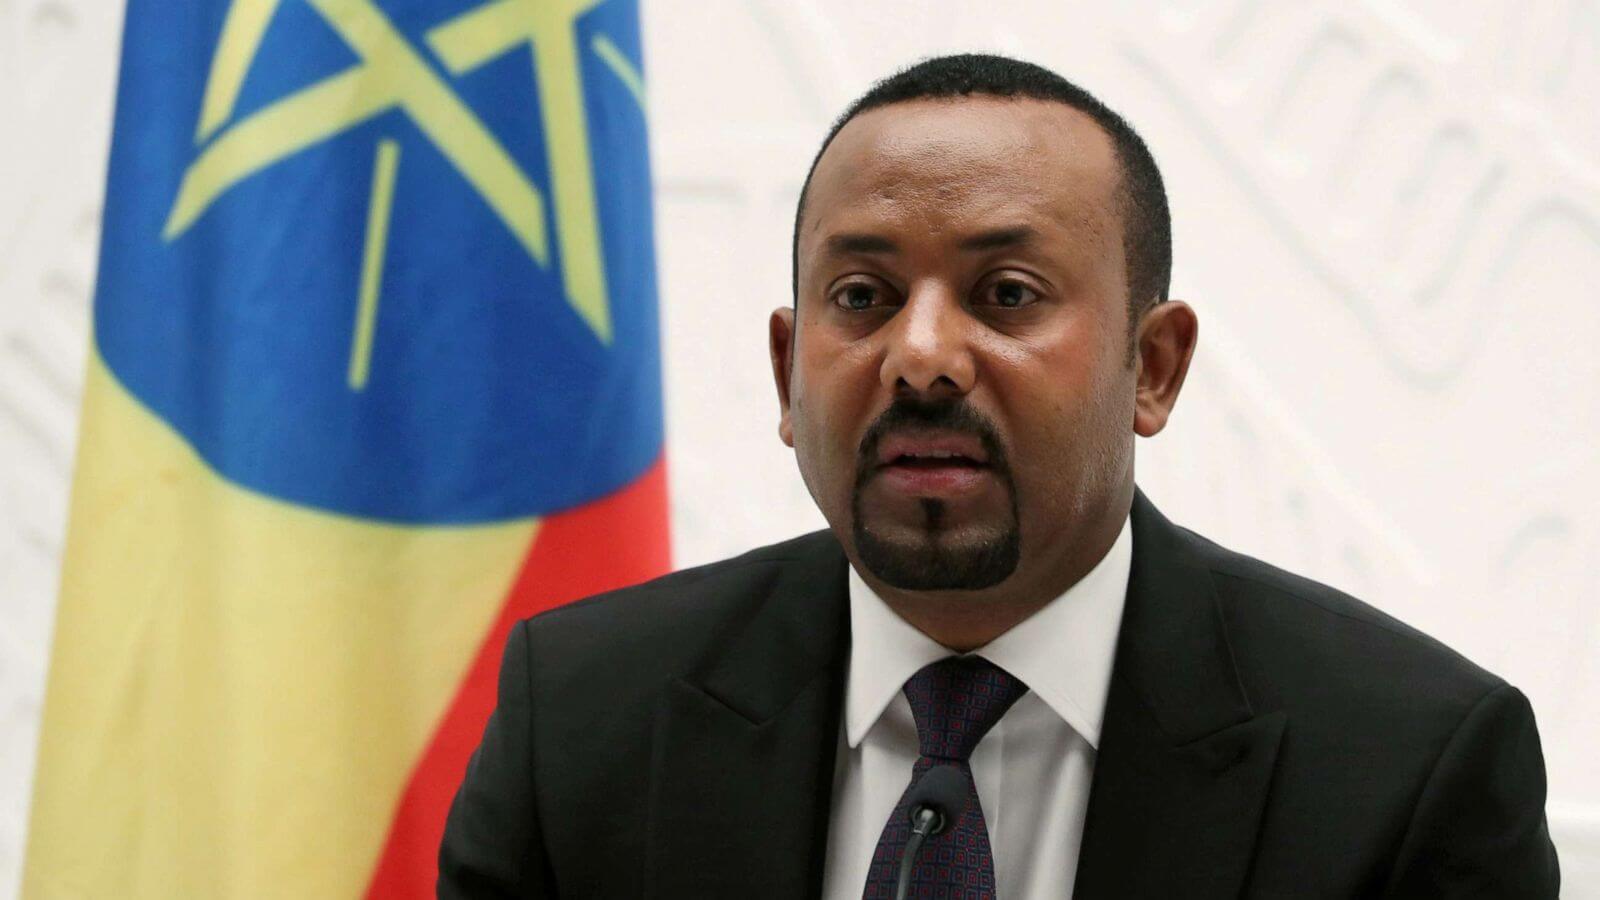 Ethiopia Forms Committee to Hold Peace Talks With TPLF Rebels in First Effort to End War